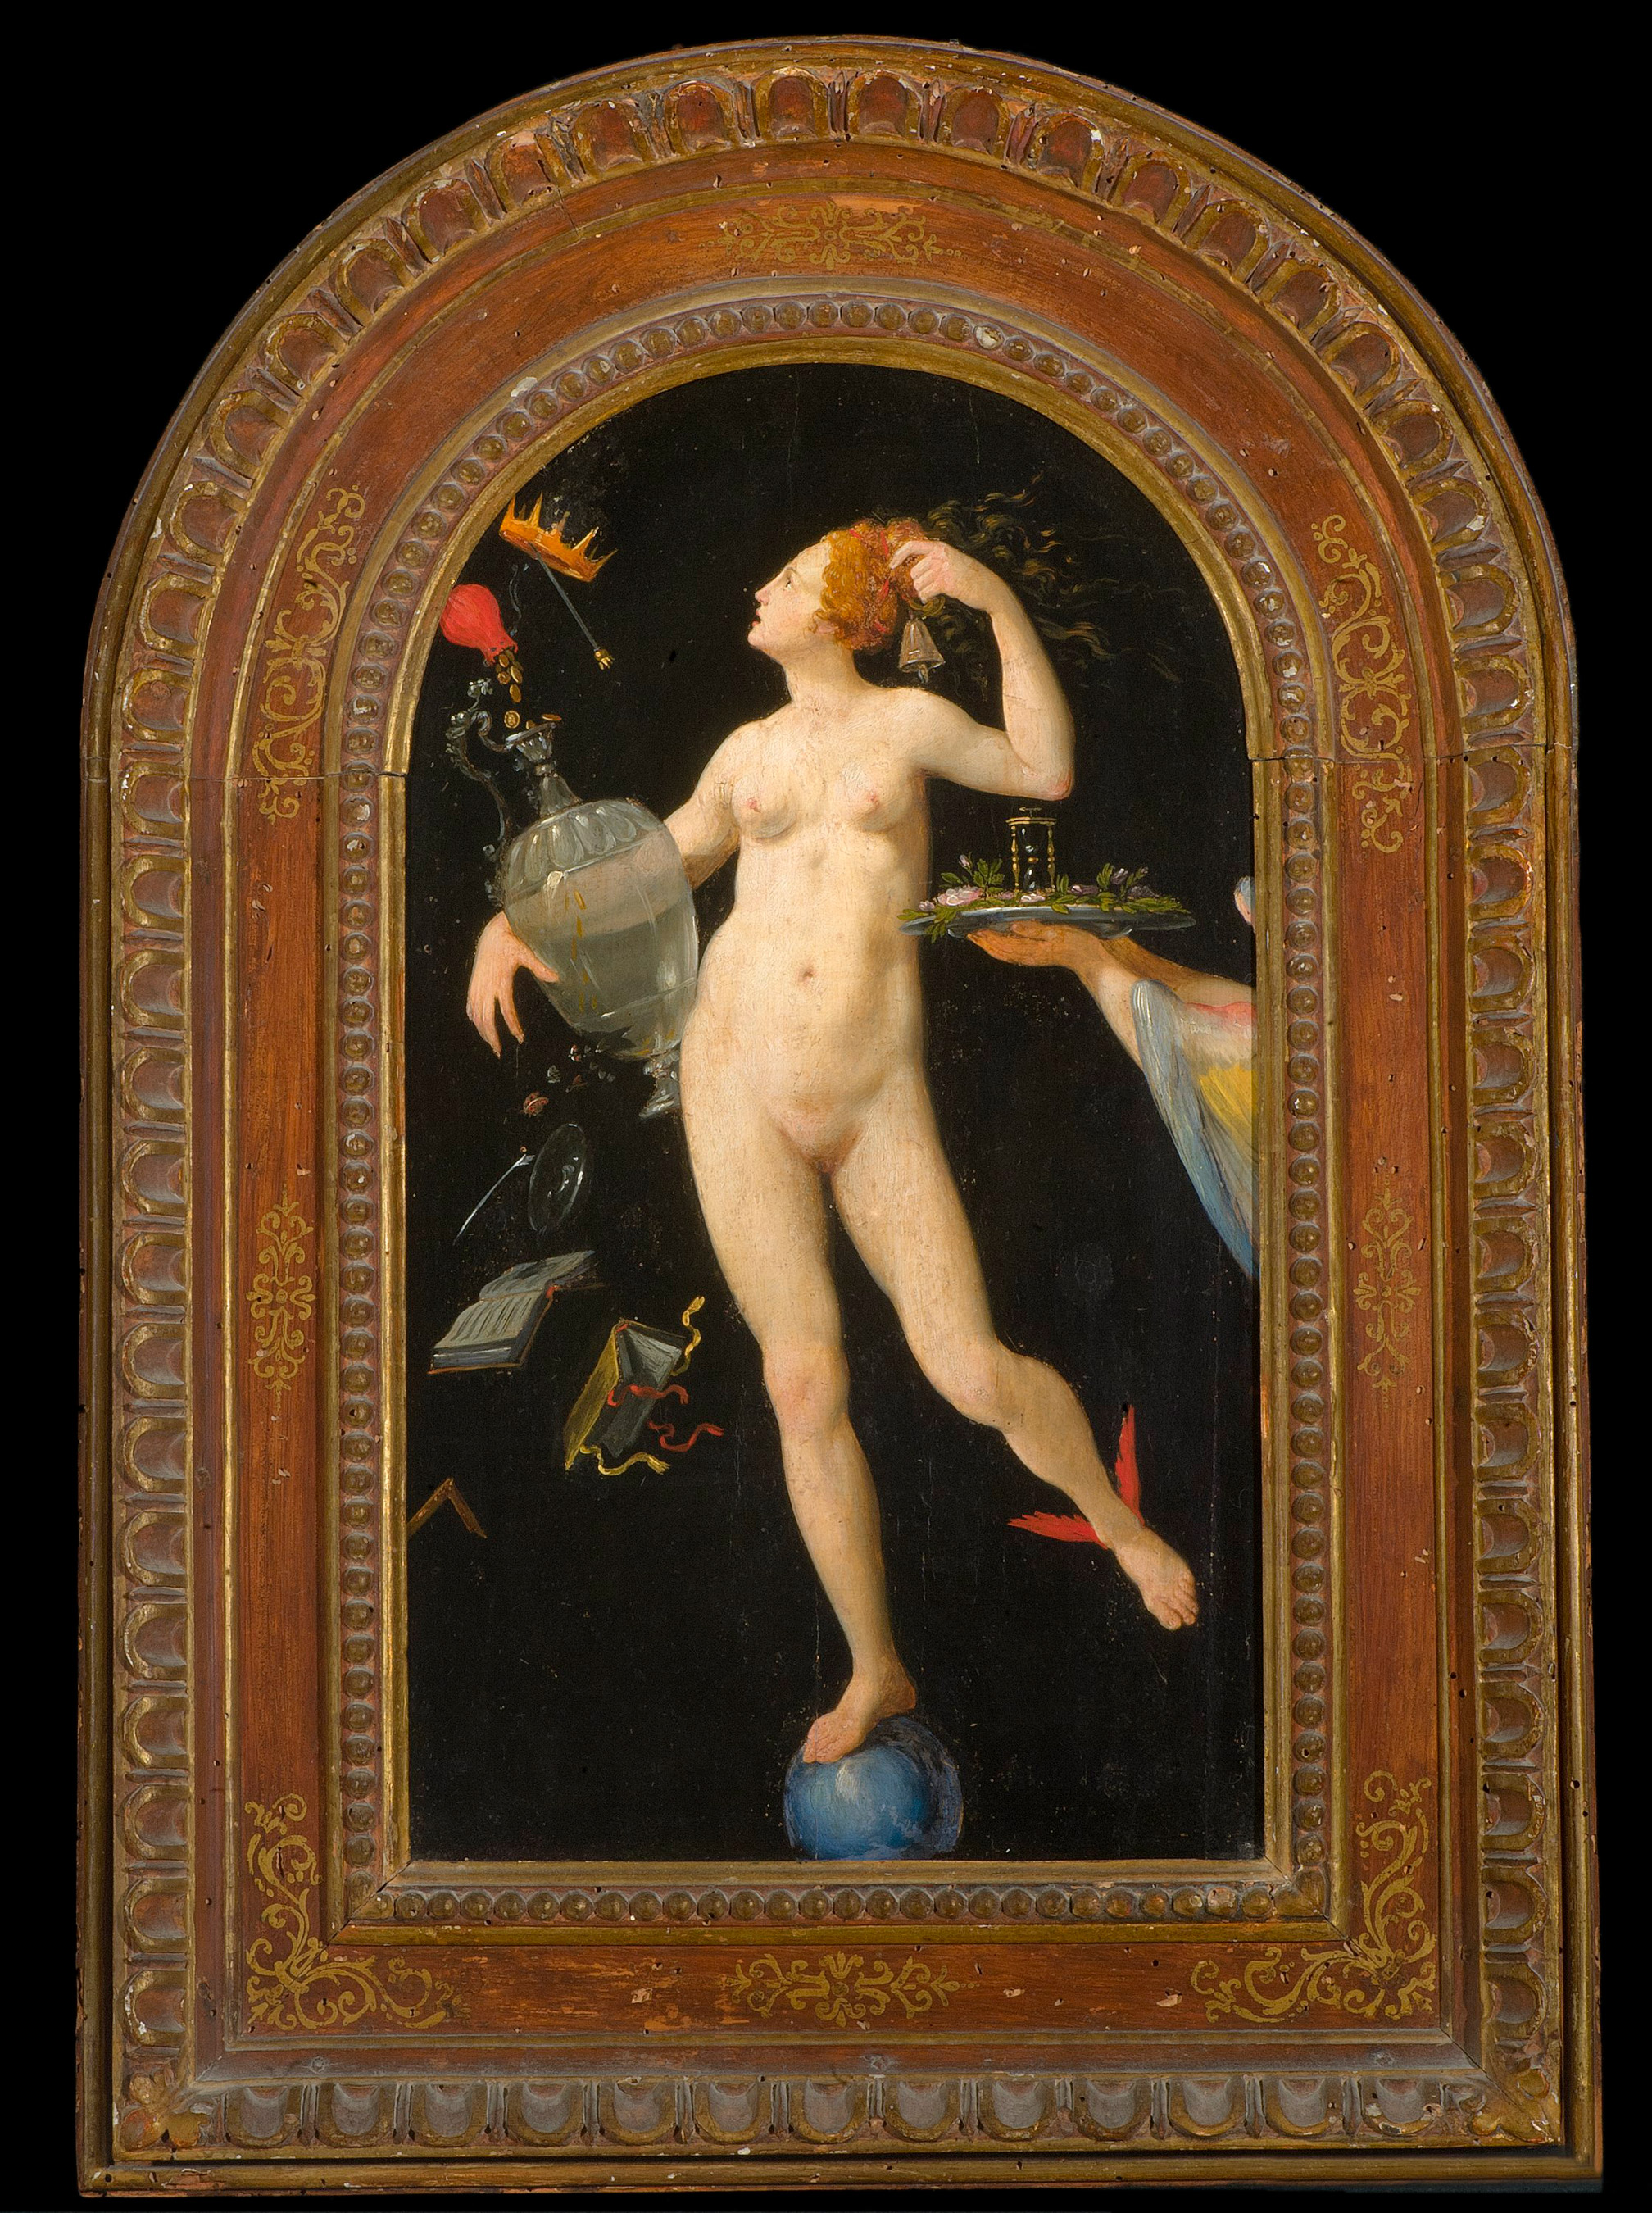 Alchemy and the arts. The Uffizi workshop: from laboratory to cabinet of curiosities